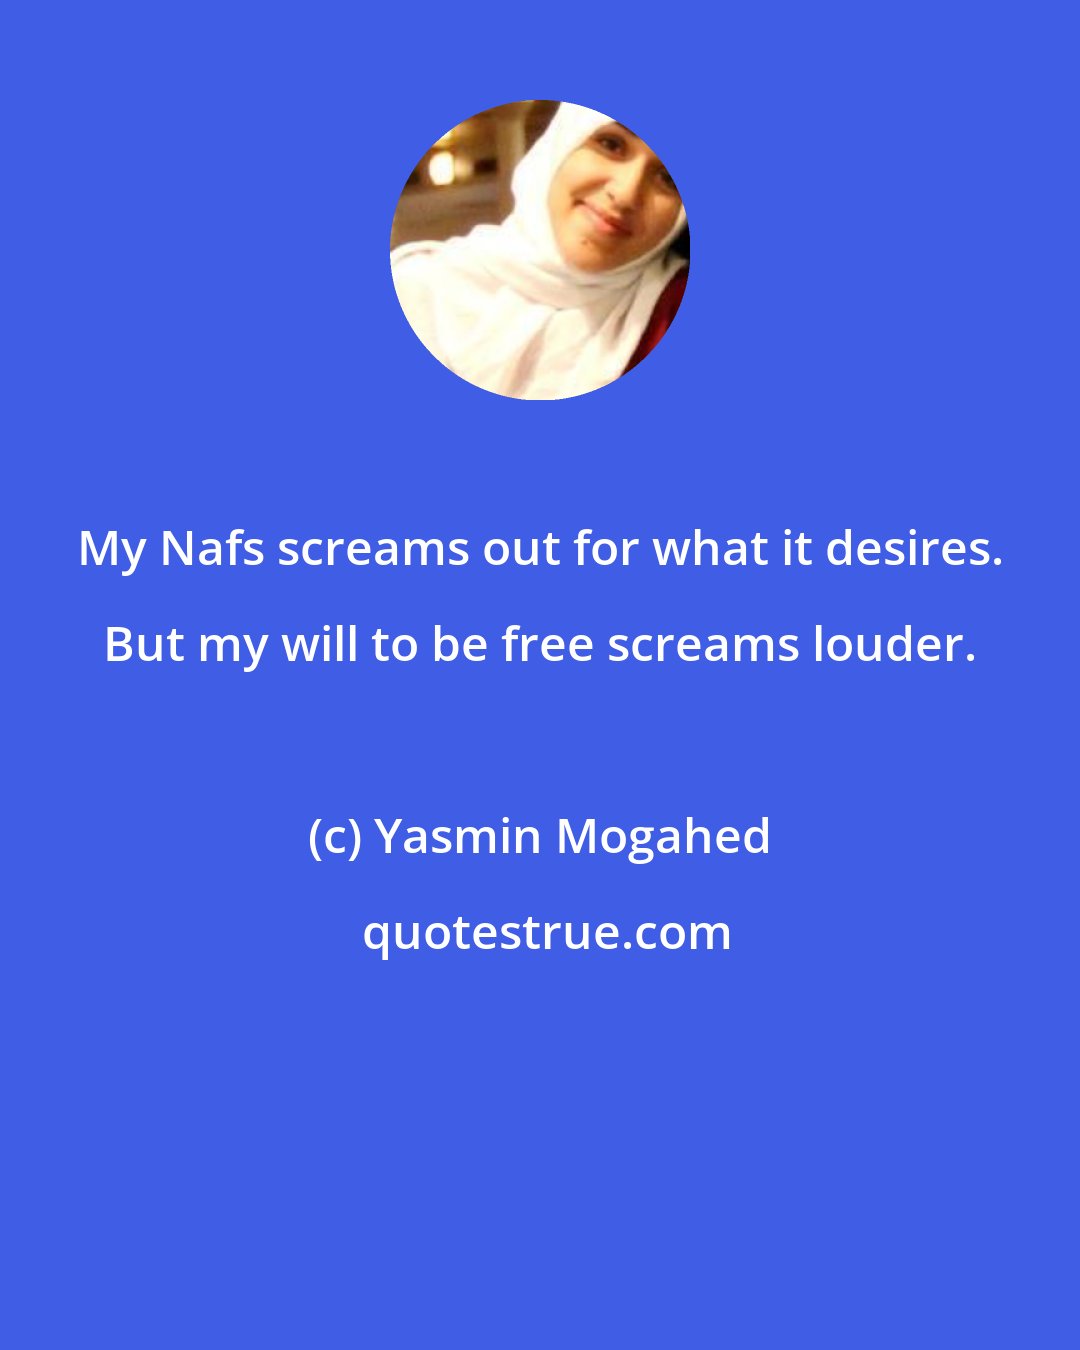 Yasmin Mogahed: My Nafs screams out for what it desires. But my will to be free screams louder.